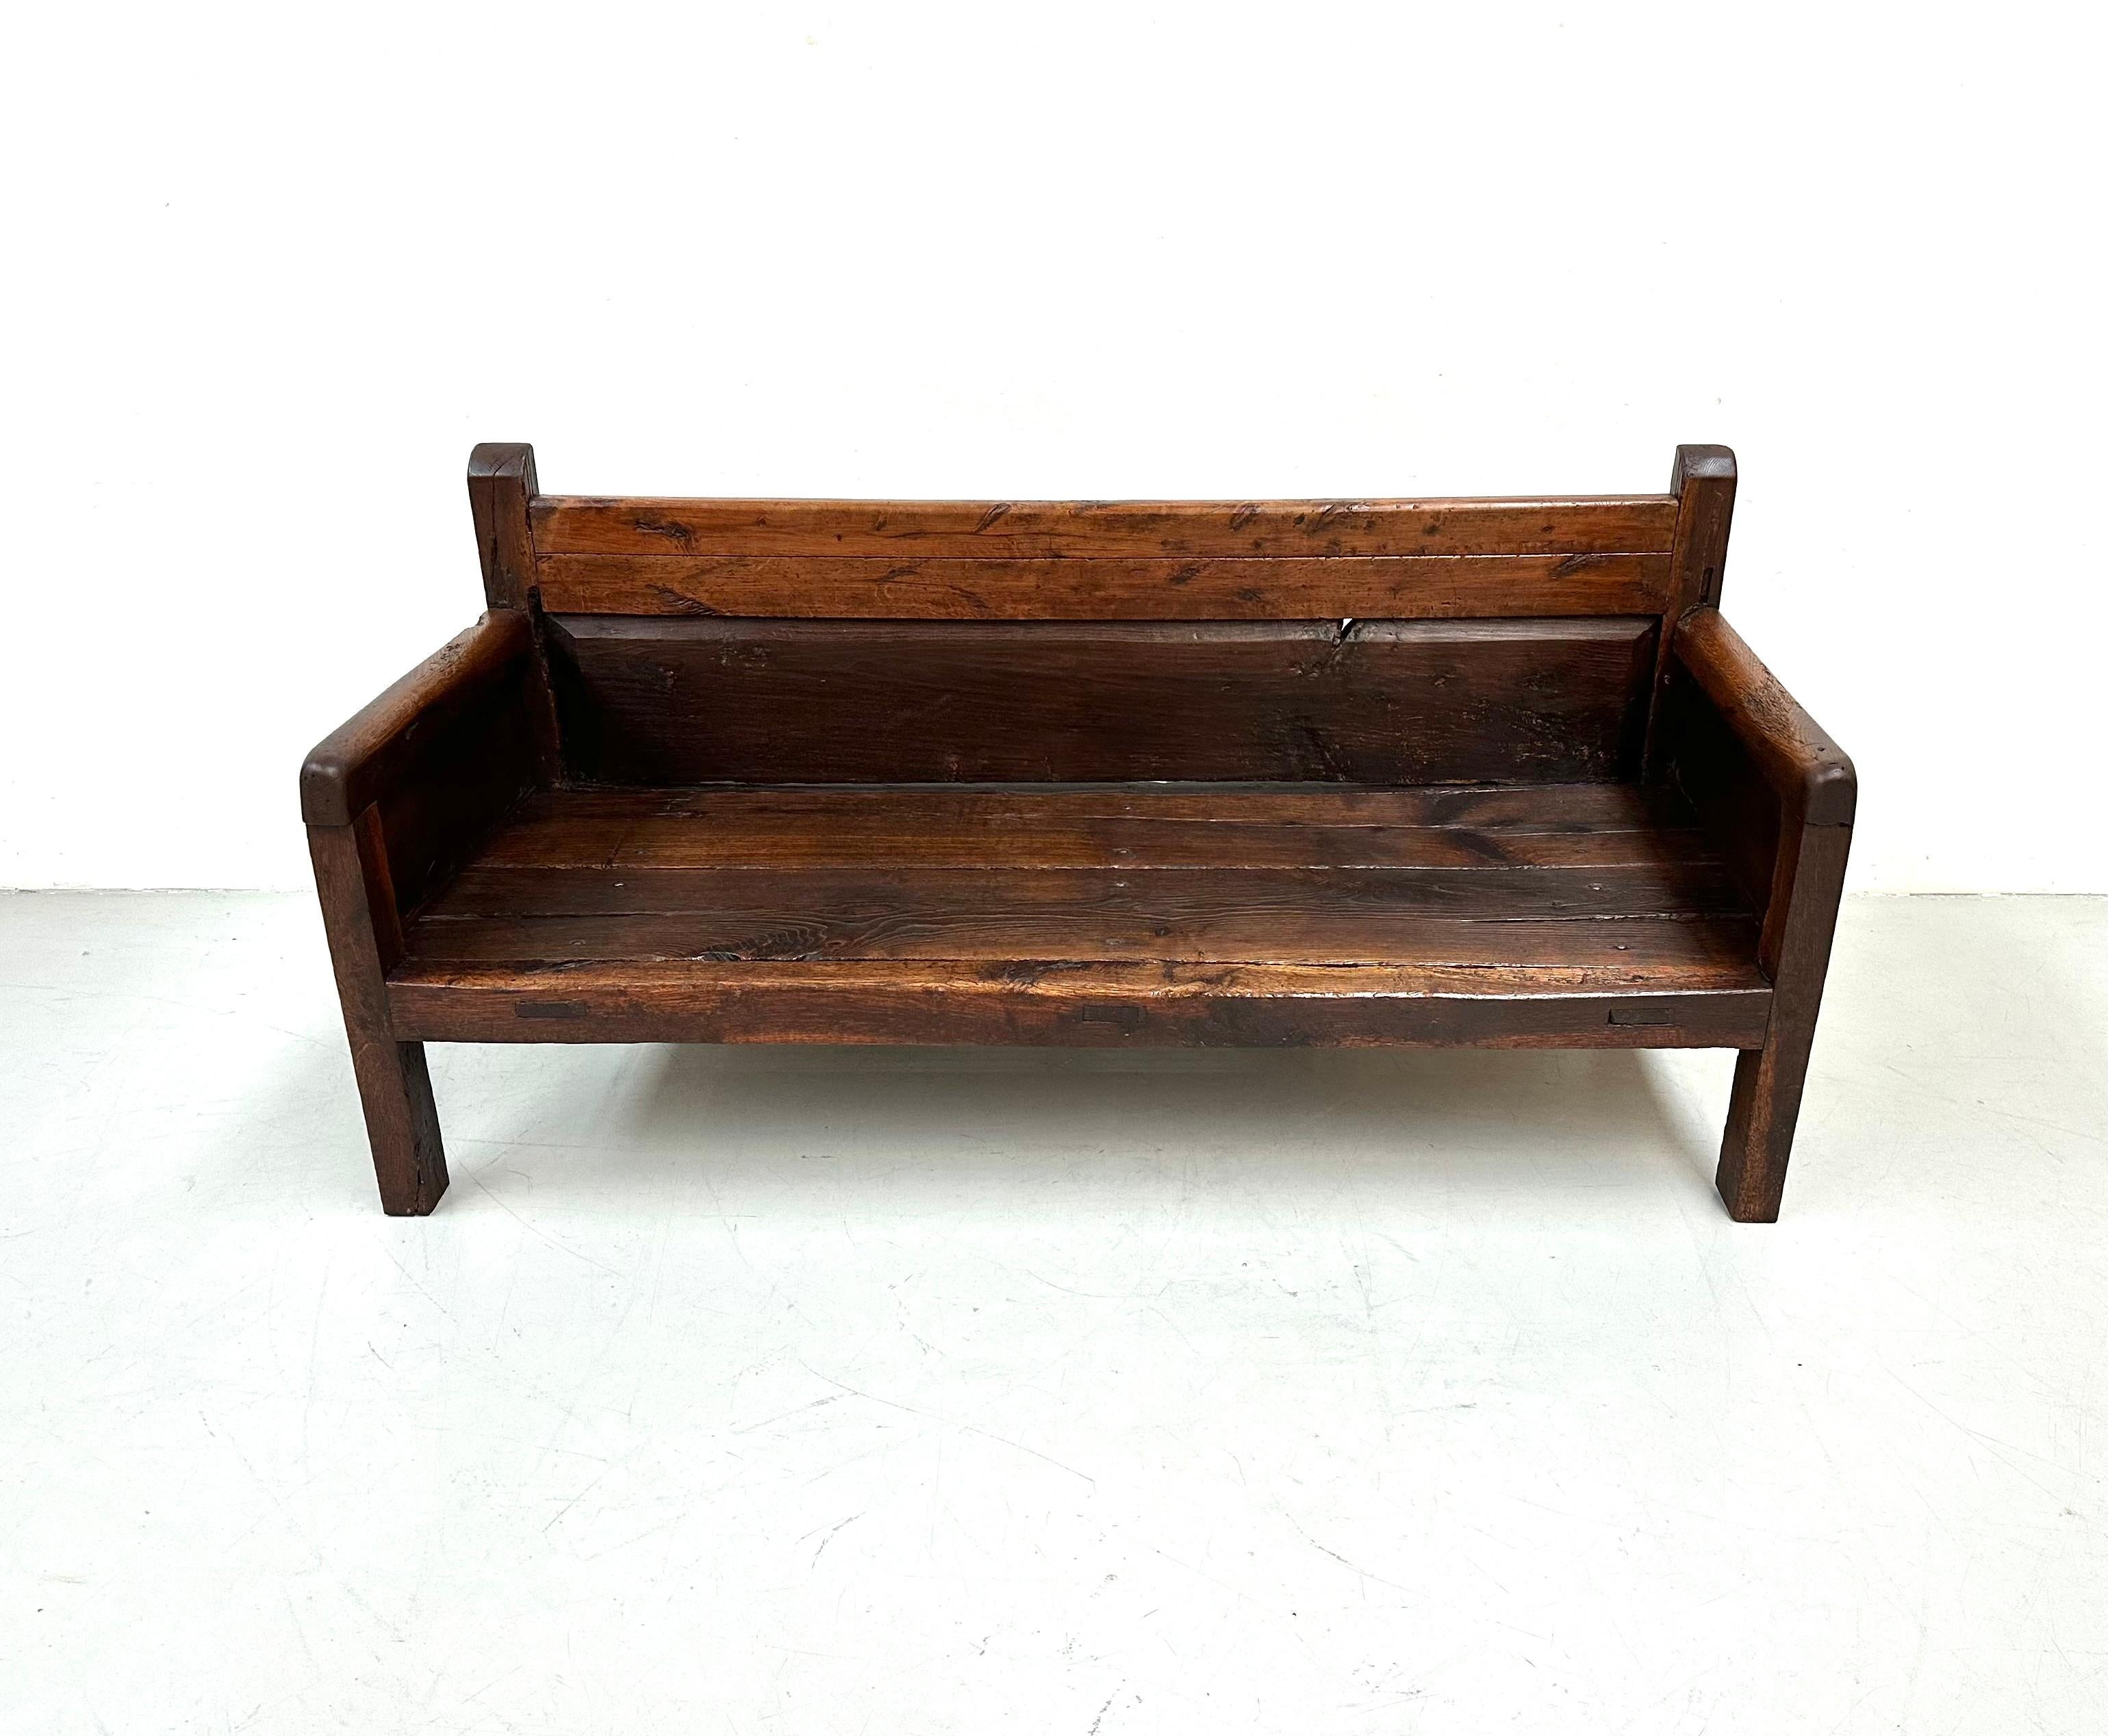 Antique Handmade Minimalistic Spanish Chestnut Wood Bench, Early 19th Century In Good Condition For Sale In Eindhoven, Noord Brabant